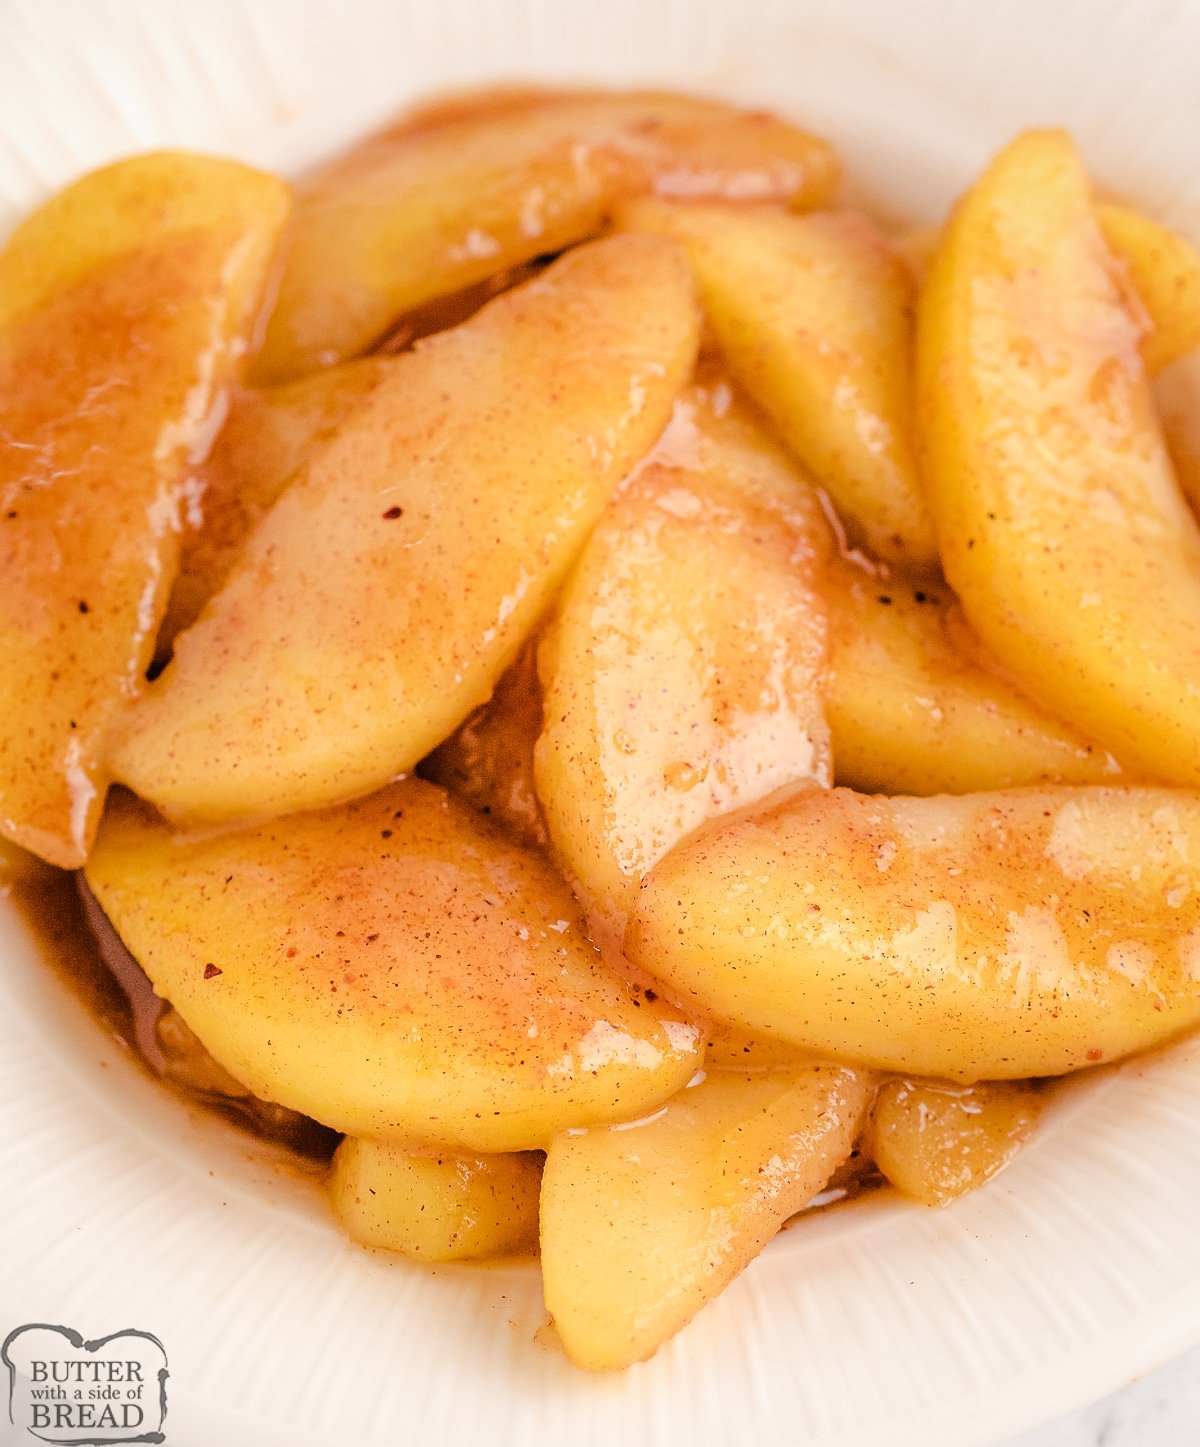 apples fried in butter in a skillet